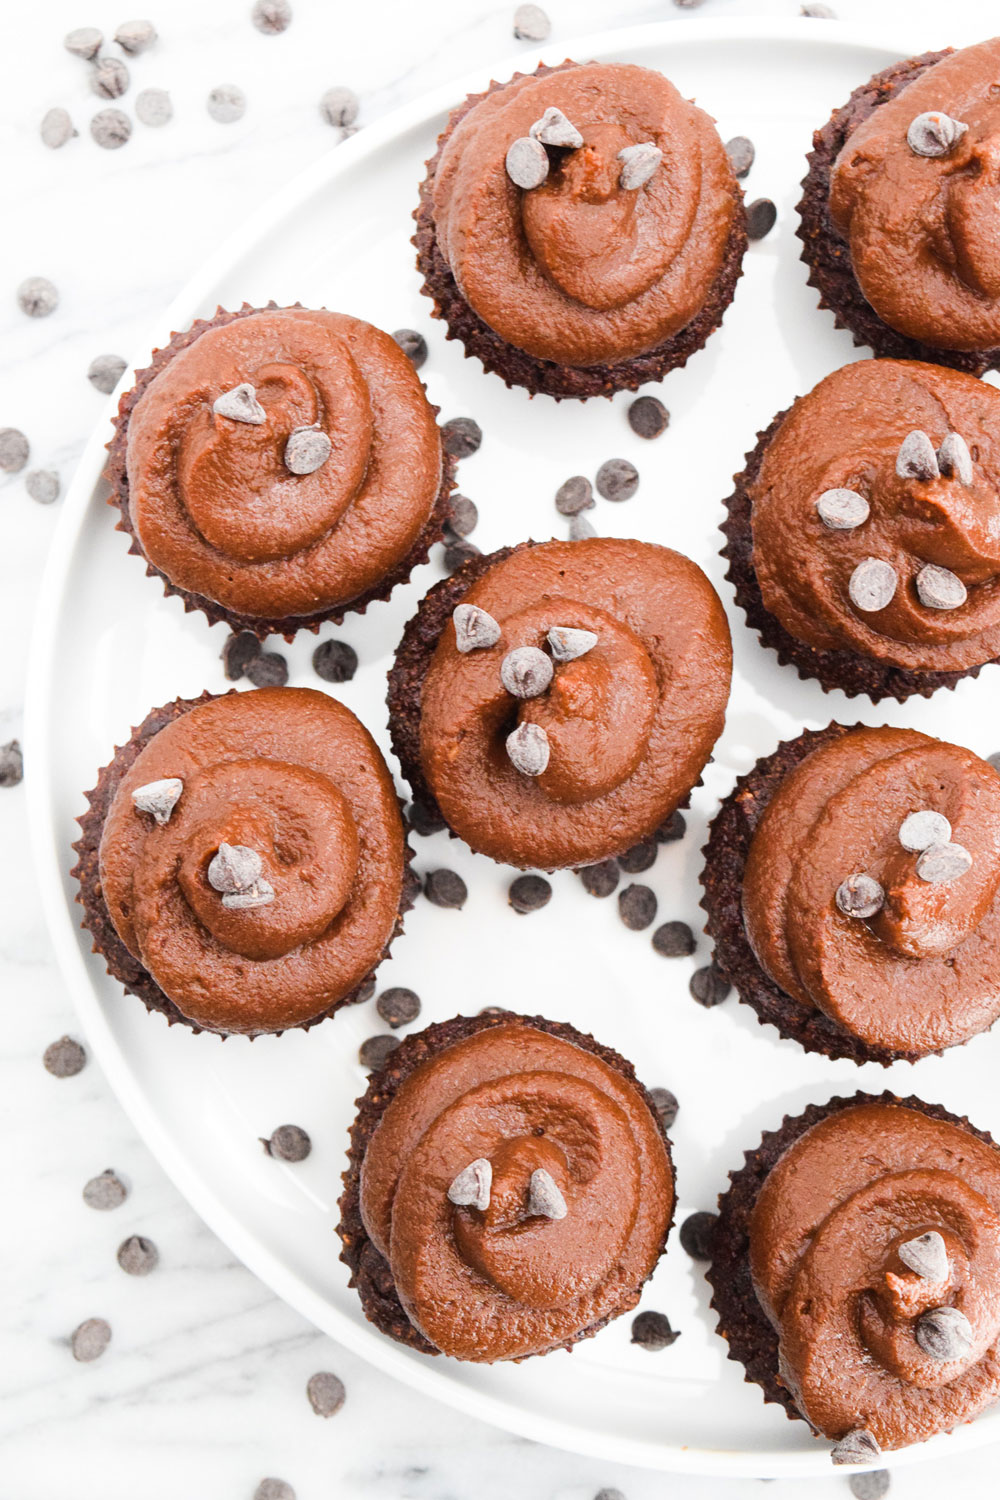 Vegan Chocolate Cupcakes with Chocolate Frosting